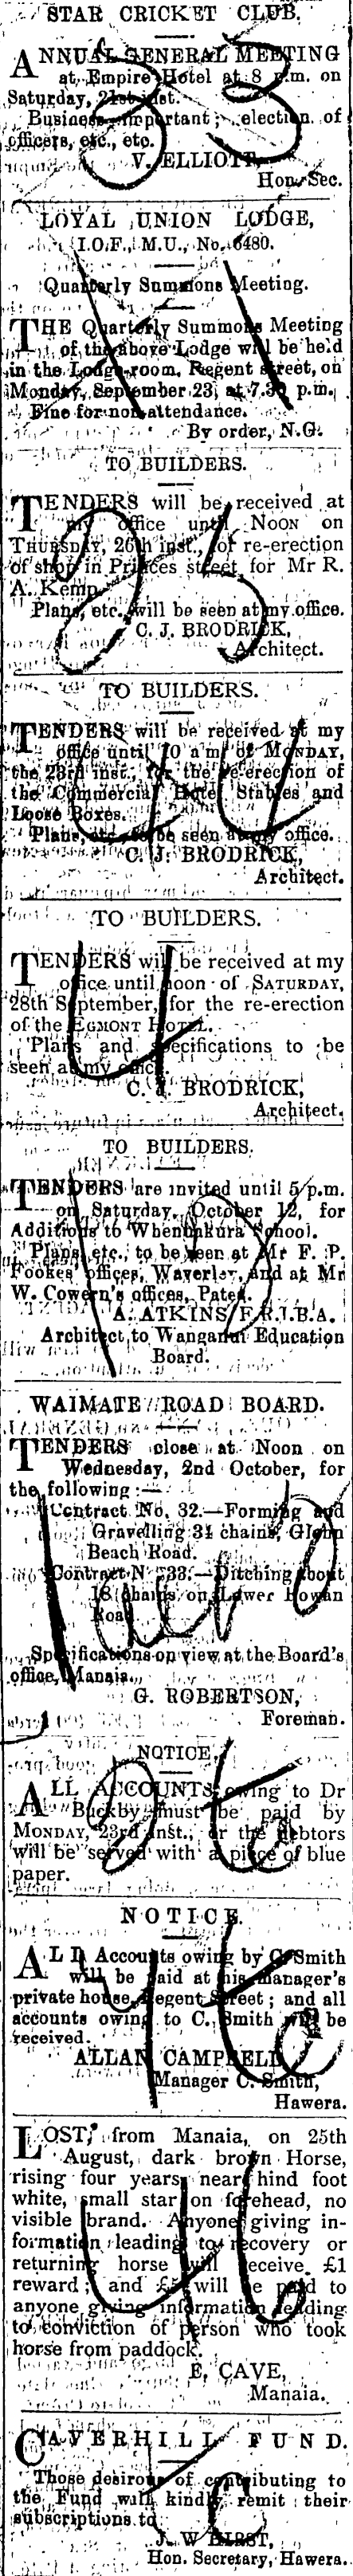 Papers Past Newspapers Hawera Normanby Star 21 September 1895 Page 3 Advertisements Column 2